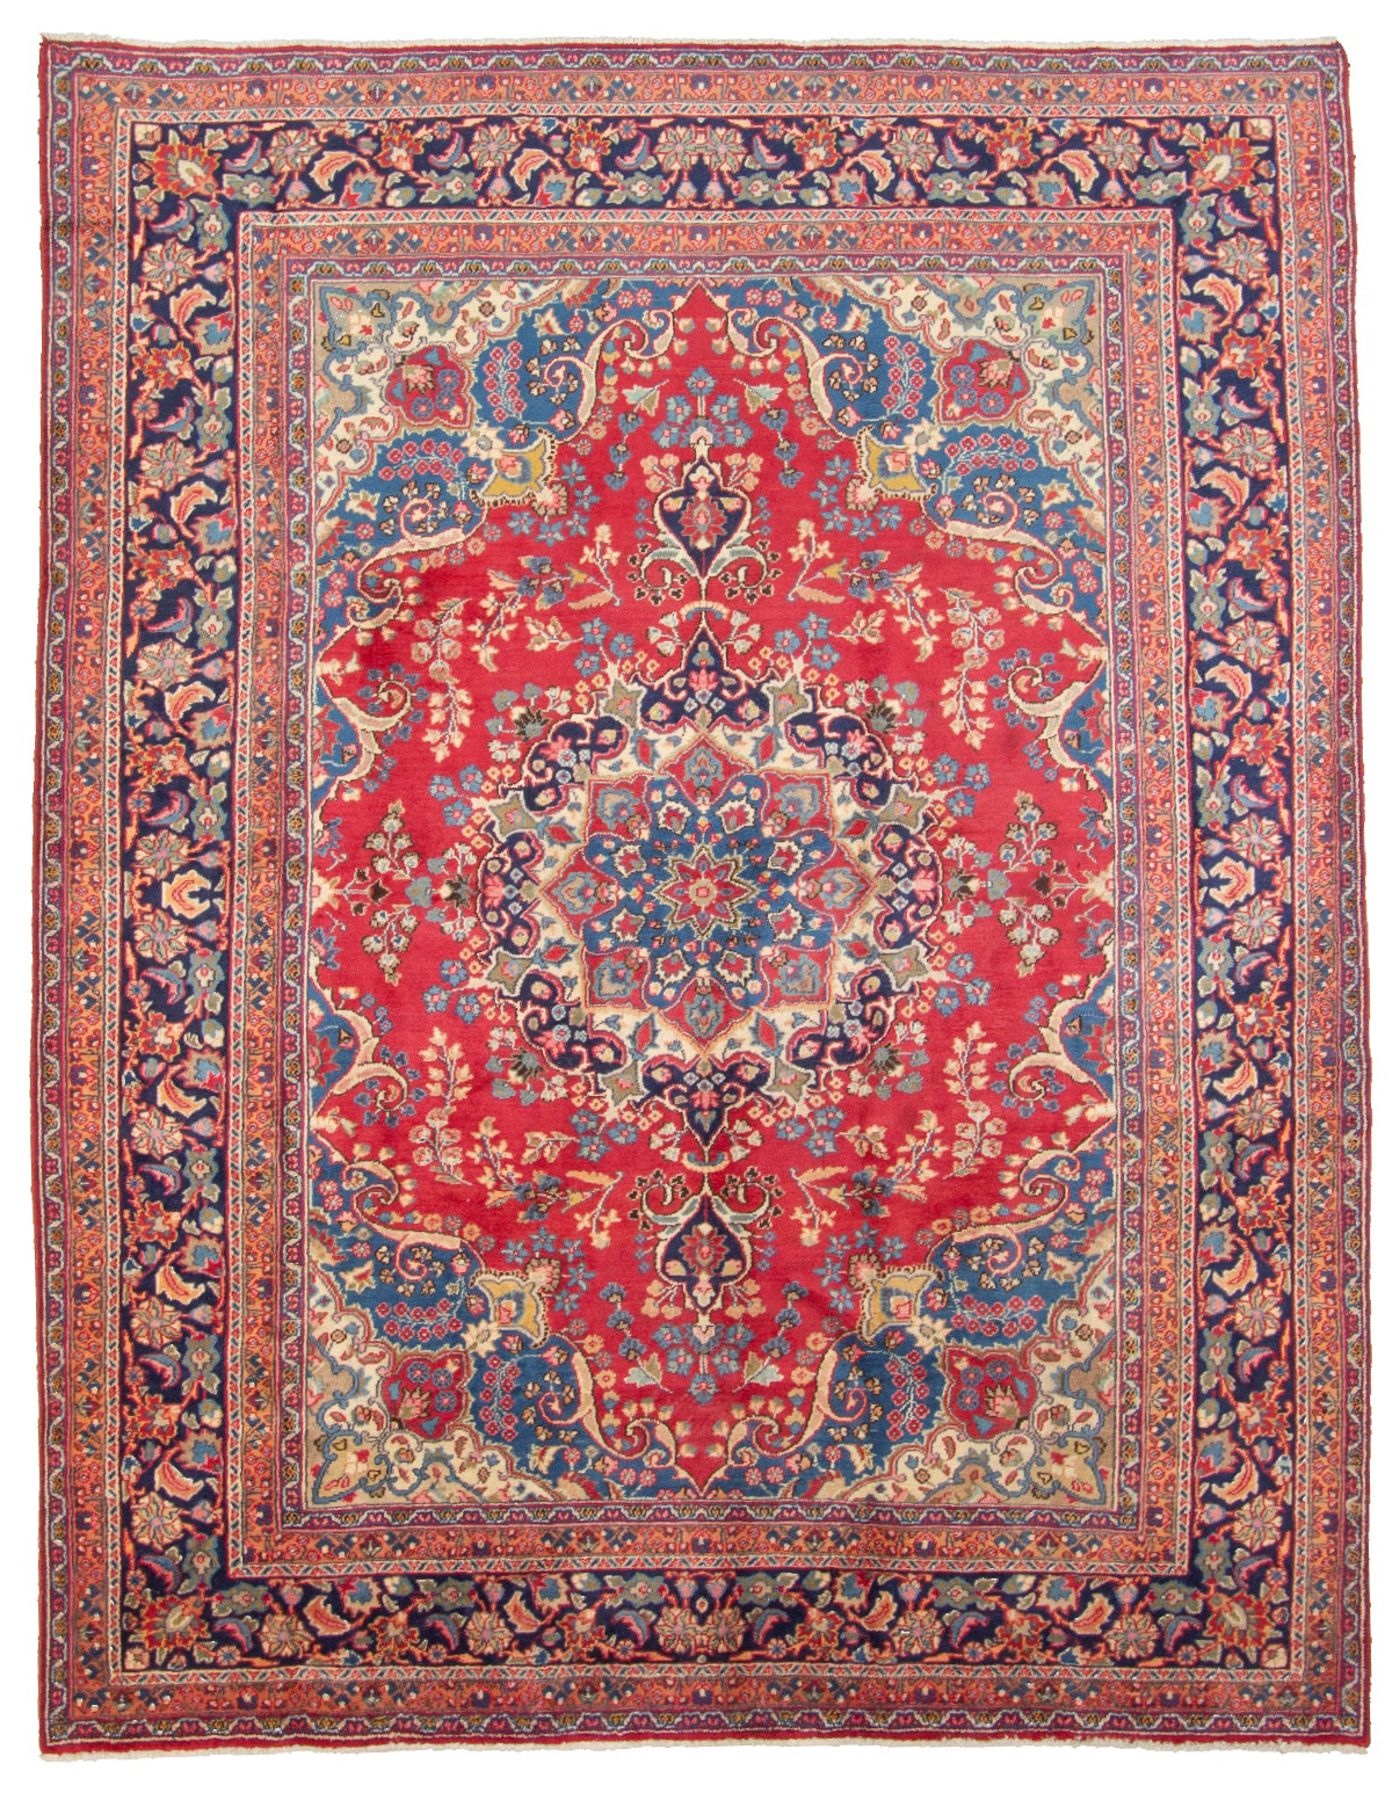 Hand-knotted Sabzevar  Wool Rug 8'3" x 10'8" Size: 8'3" x 10'8"  